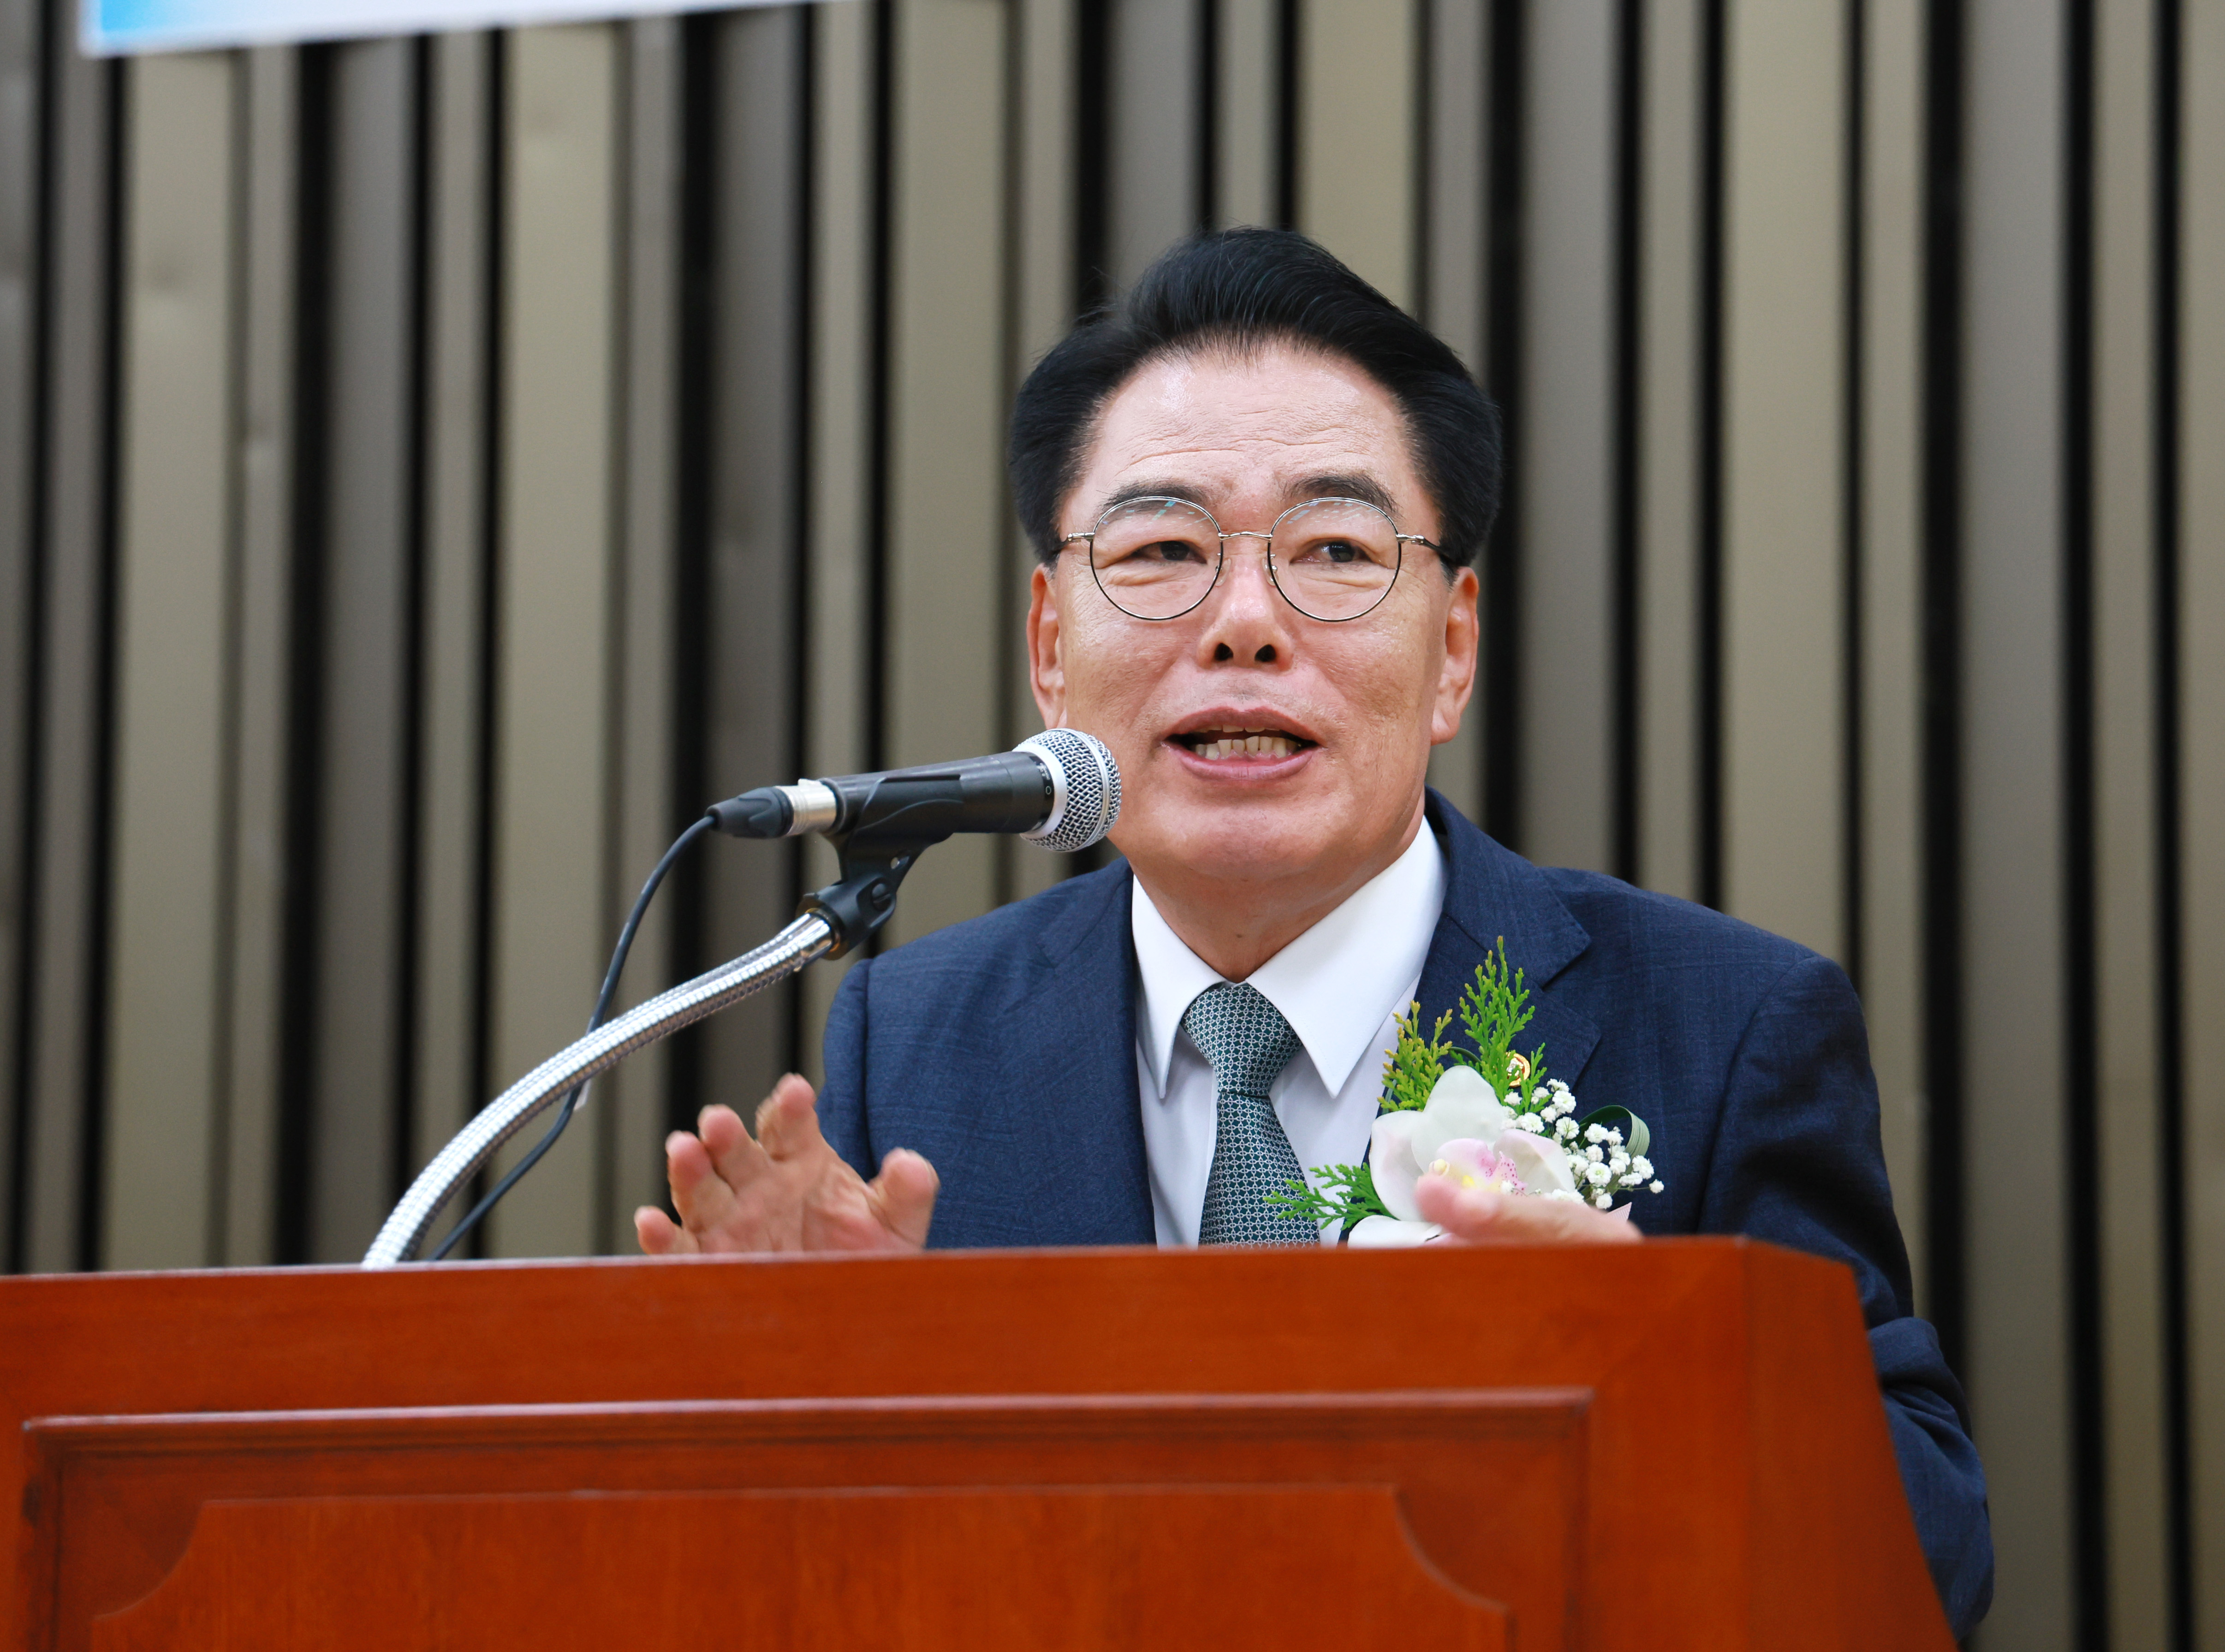 Inaugural Address of the 36th National Assembly Secretary General 관련사진 2 보기